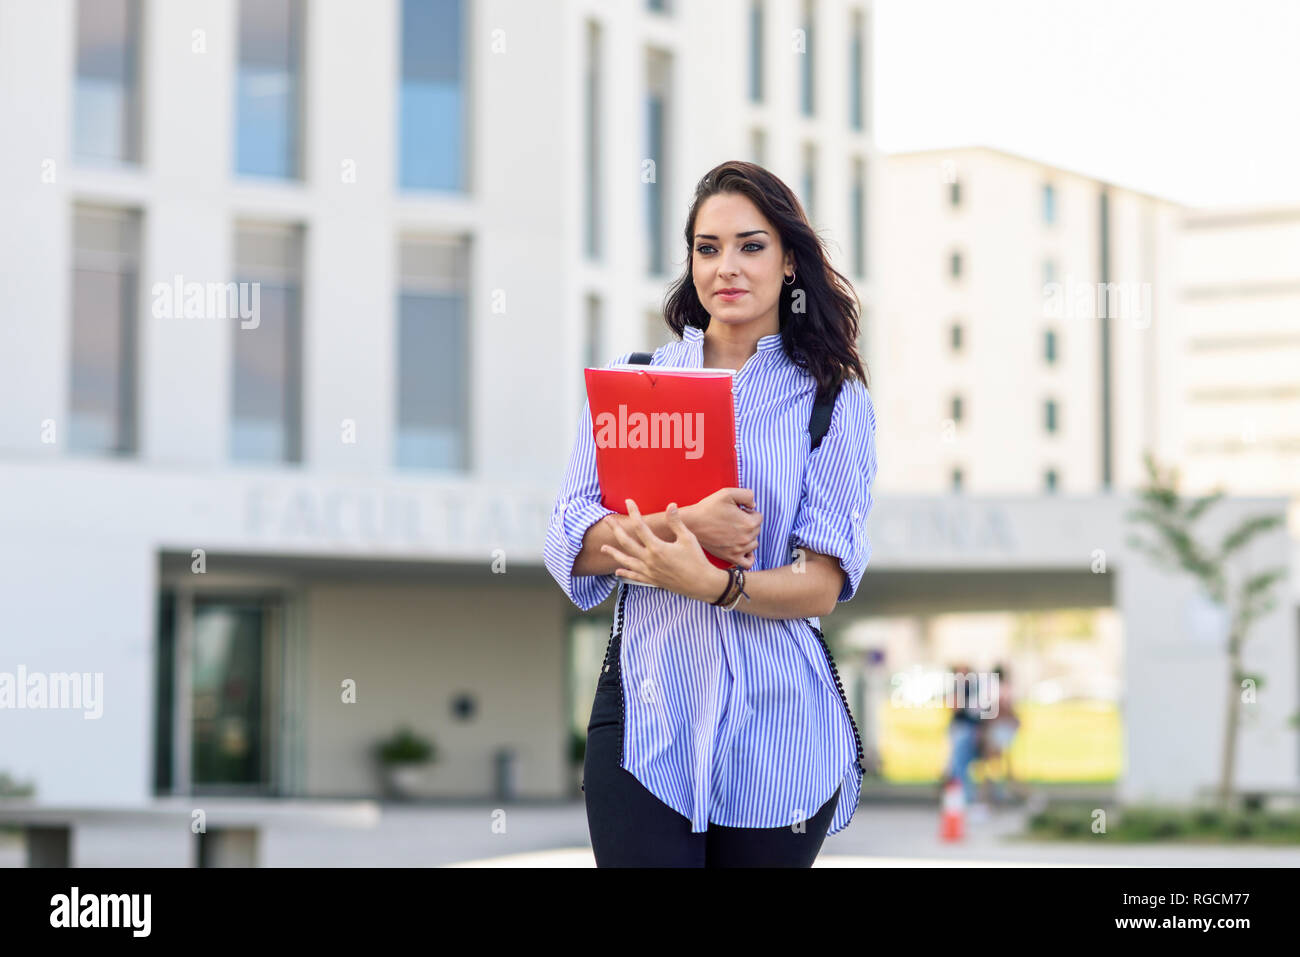 Portrait of student with notebooks on campus Stock Photo